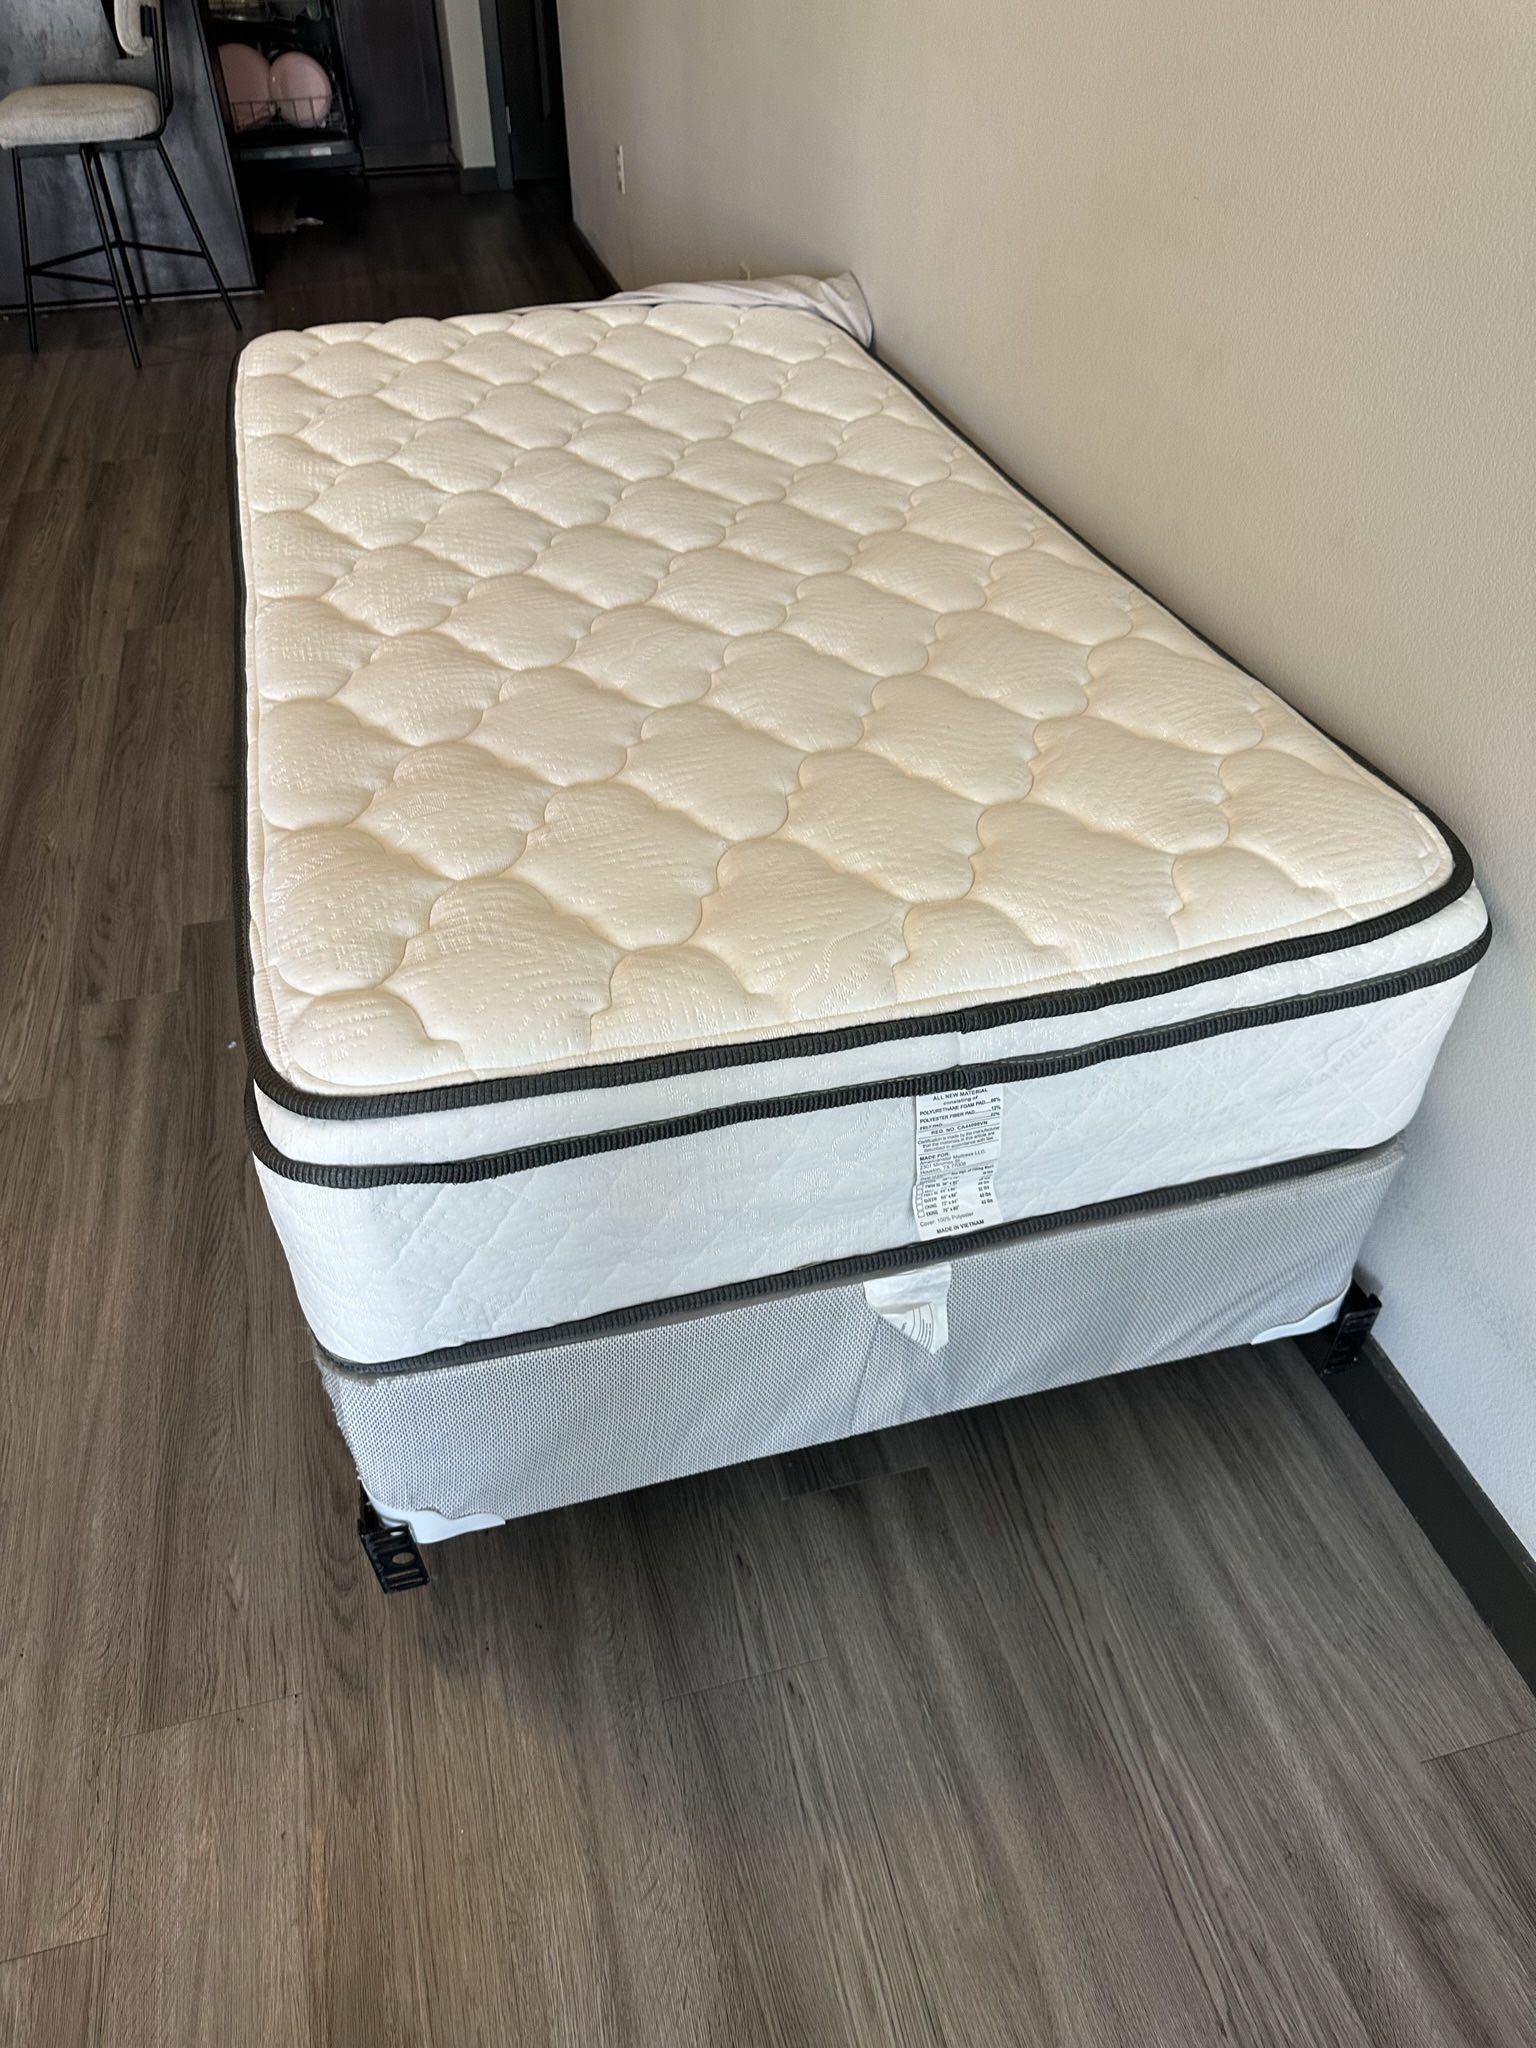 Twin Size Pillow top Mattress, Box spring, And Frame